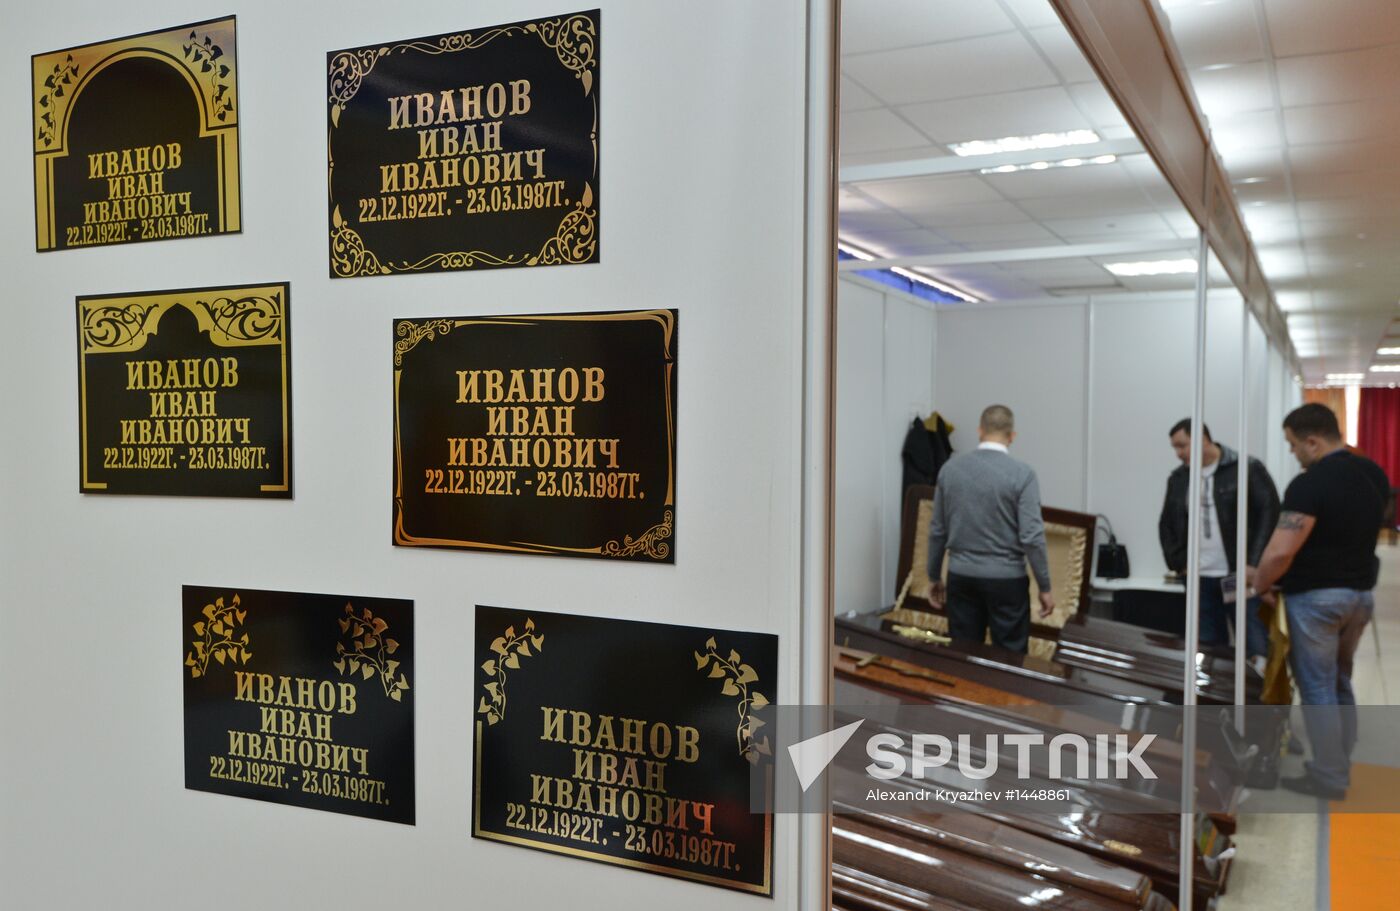 120th years of funeral industry in Russia